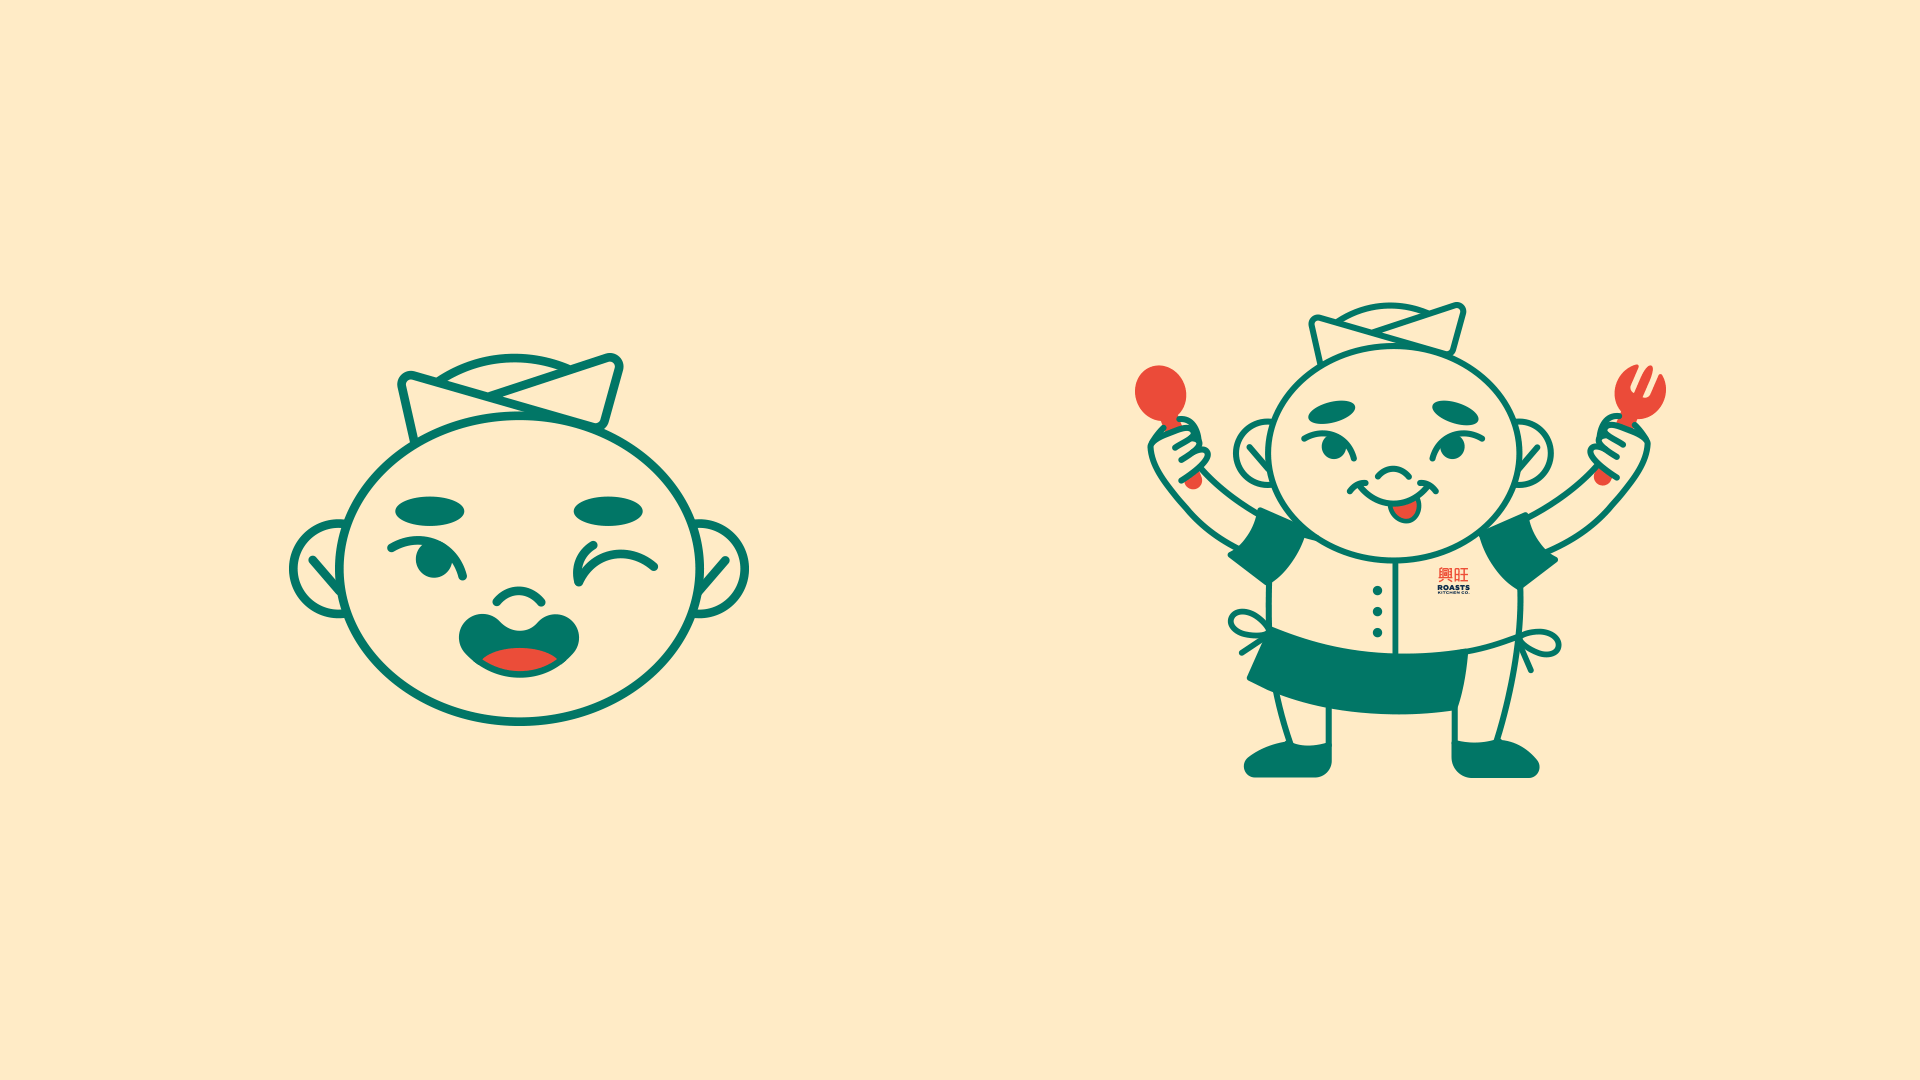 Cute animated mascot design for for Hong Kong roasts restaurant brand Roasts Kitchen Company